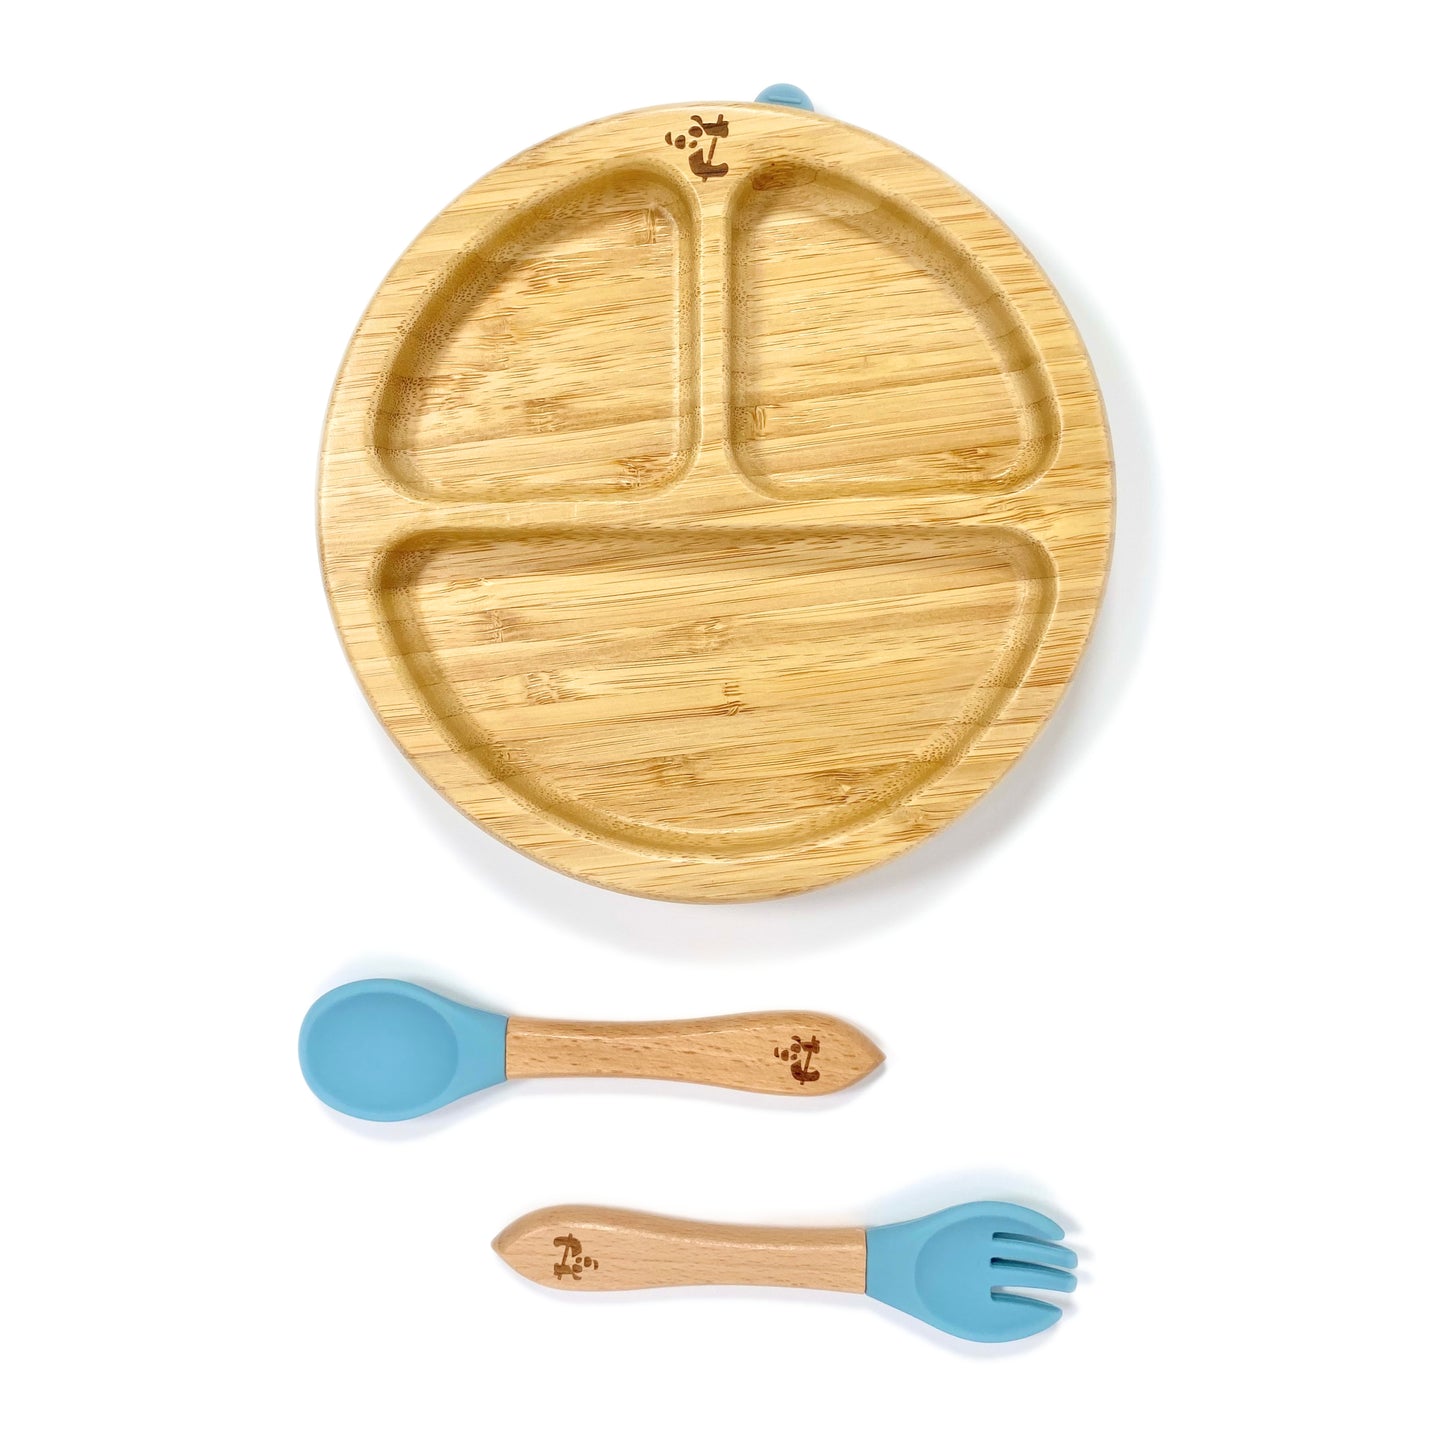 A children’s bamboo tableware set, including bamboo section plate with sky blue silicone suction ring, and matching bamboo and silicone cutlery.